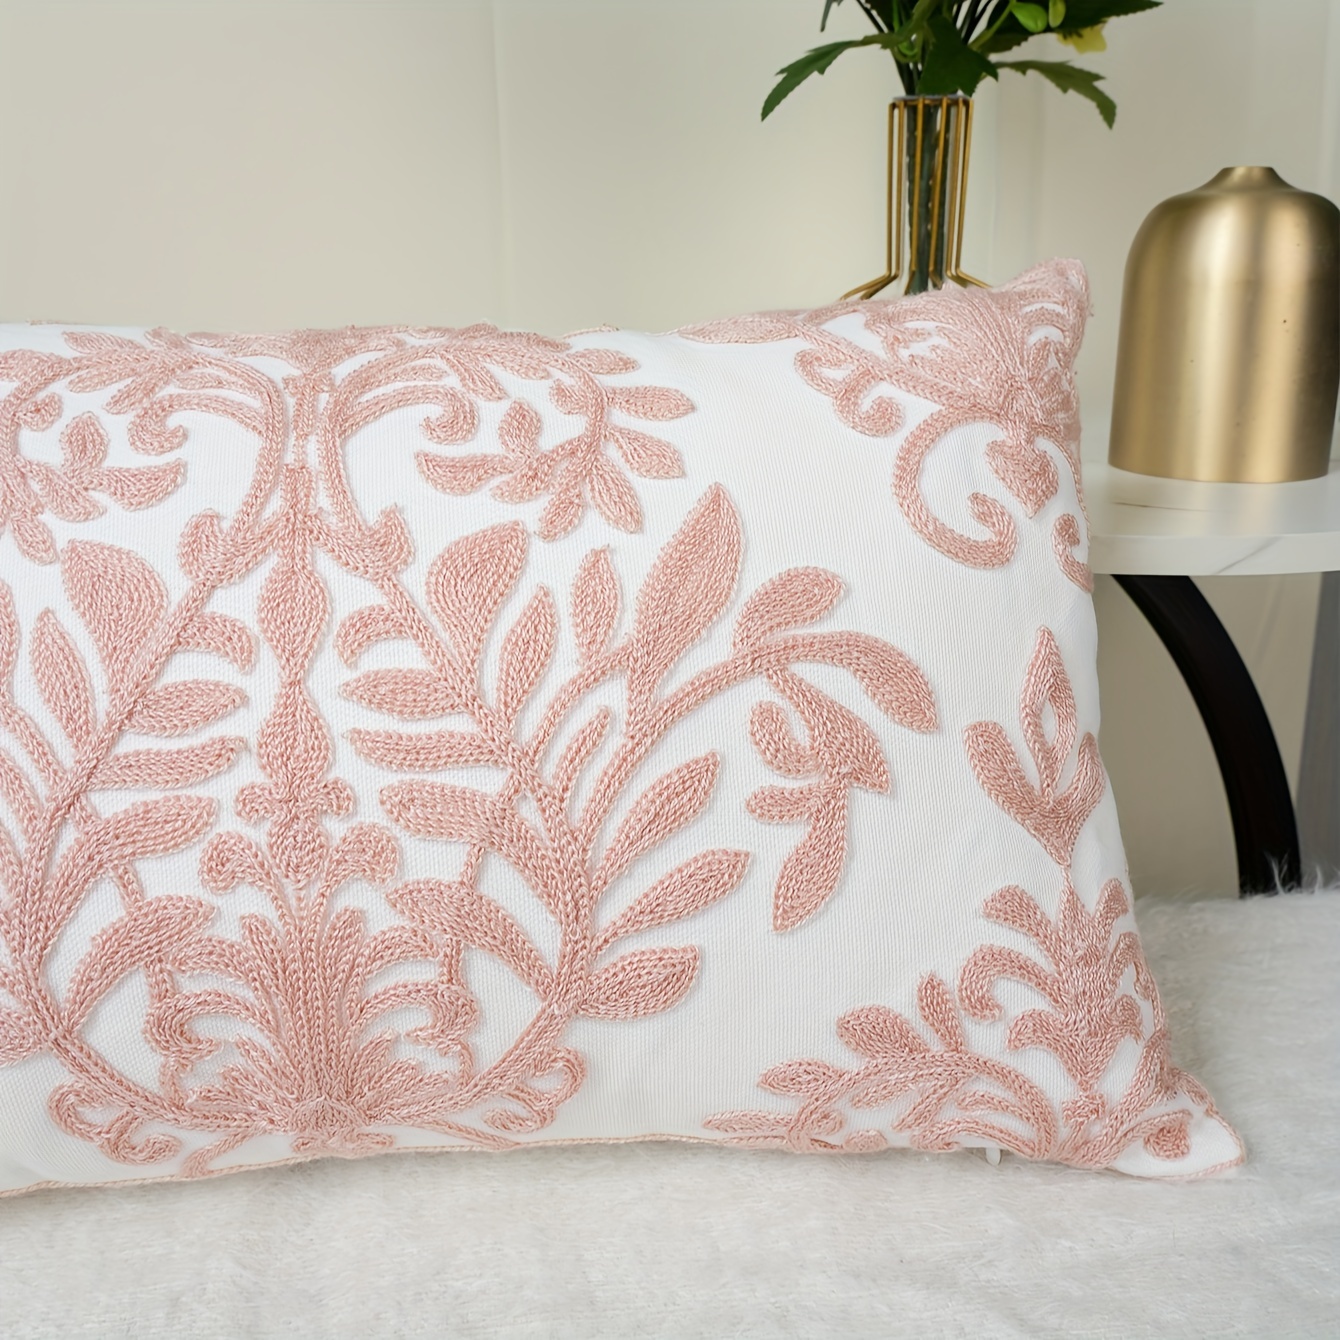 1pc European Style Embroidered Cotton Canvas Home Decoration Cushion Pillow Case, Home Decor, Room Decor, Bedroom Decor, Living Room Decor (Cushion Is Not Included)